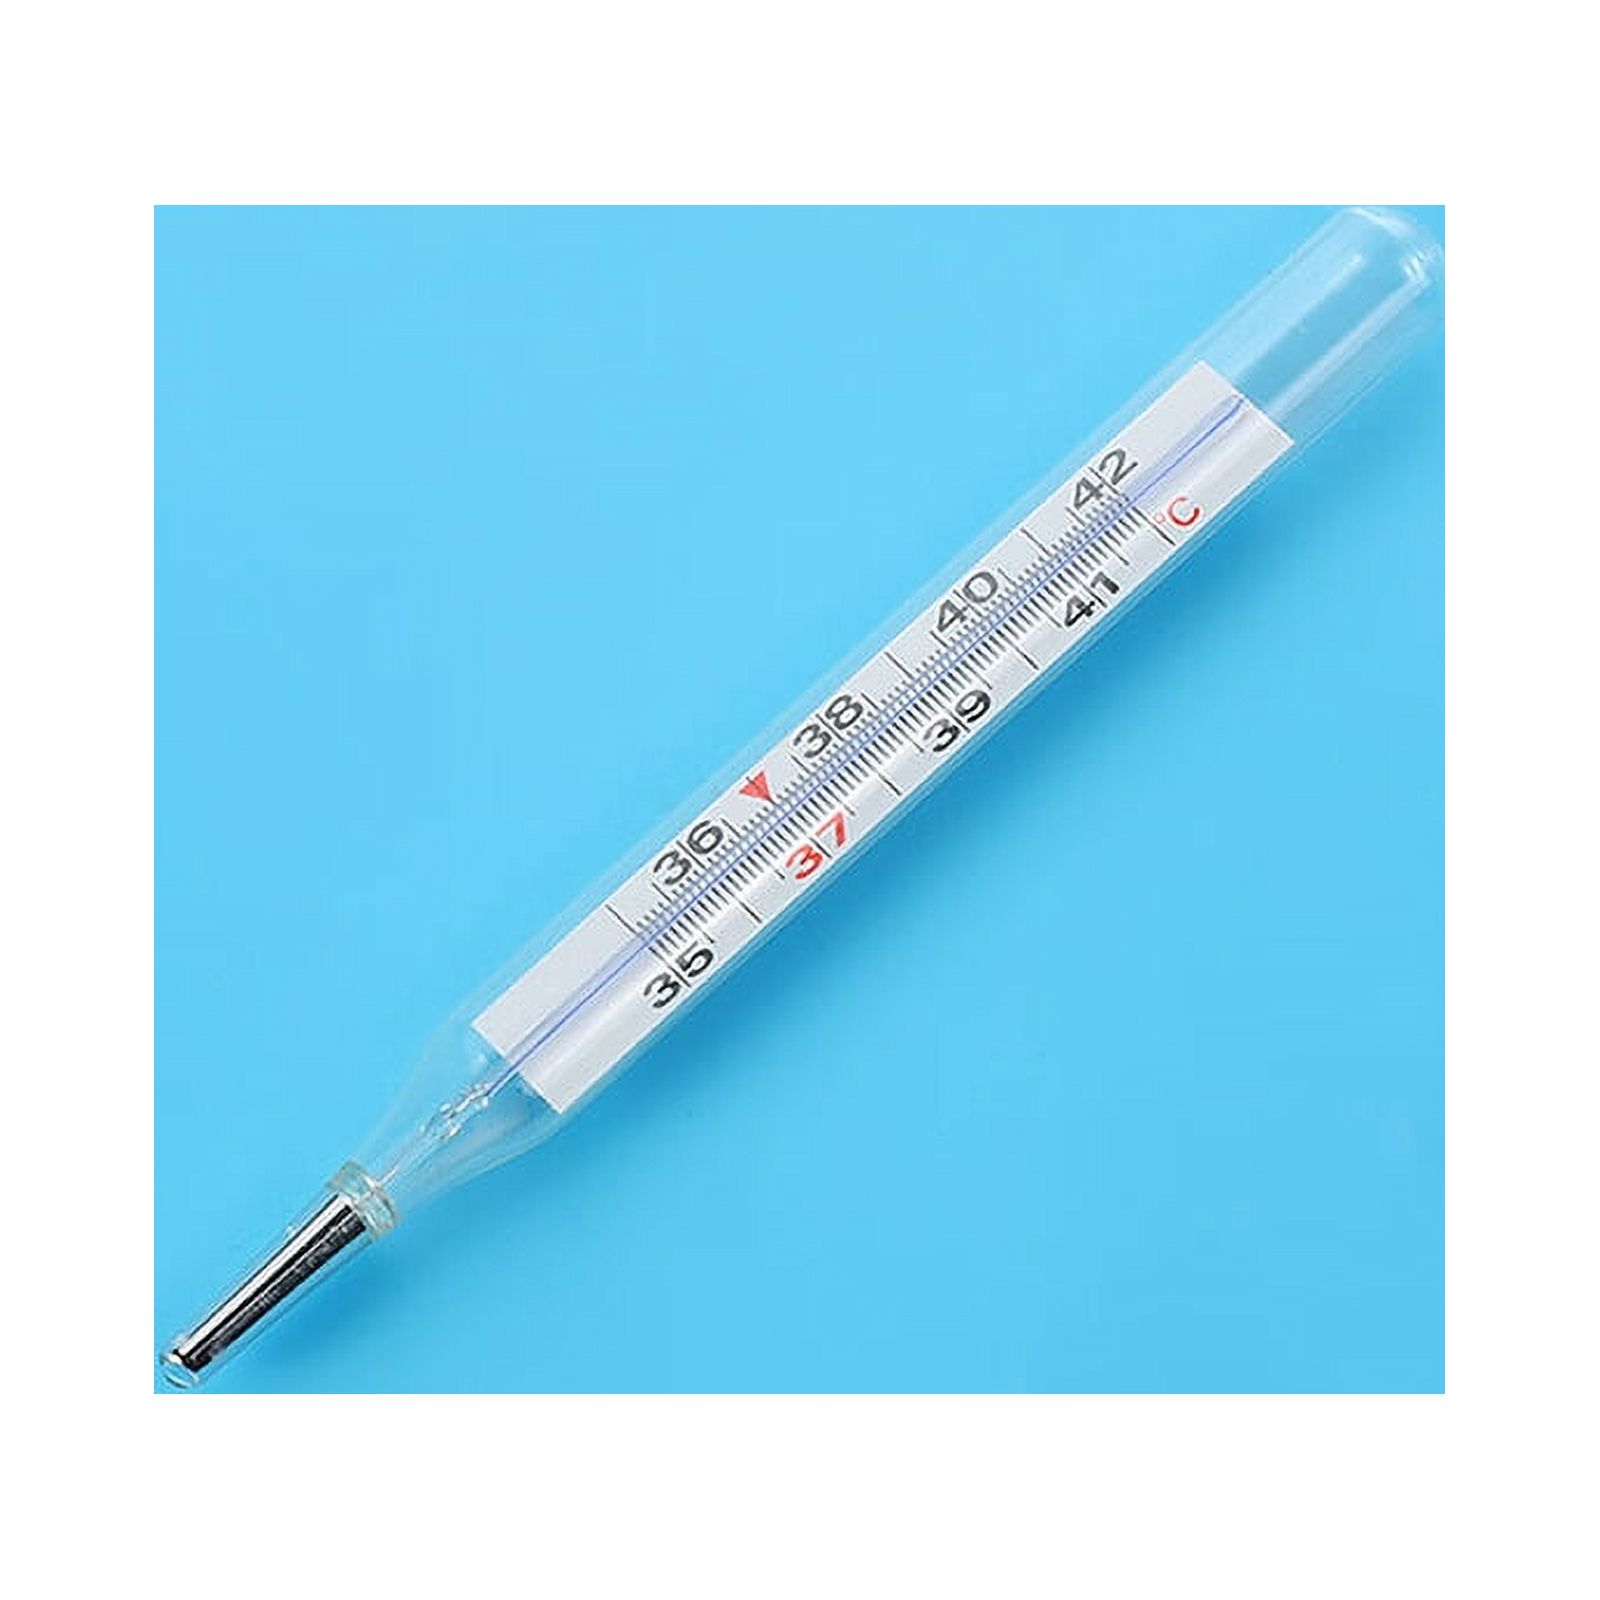 Ostrifin 1Pc Medical Mercury Freeglass Thermometer Clinical Measurement Device - image 4 of 5